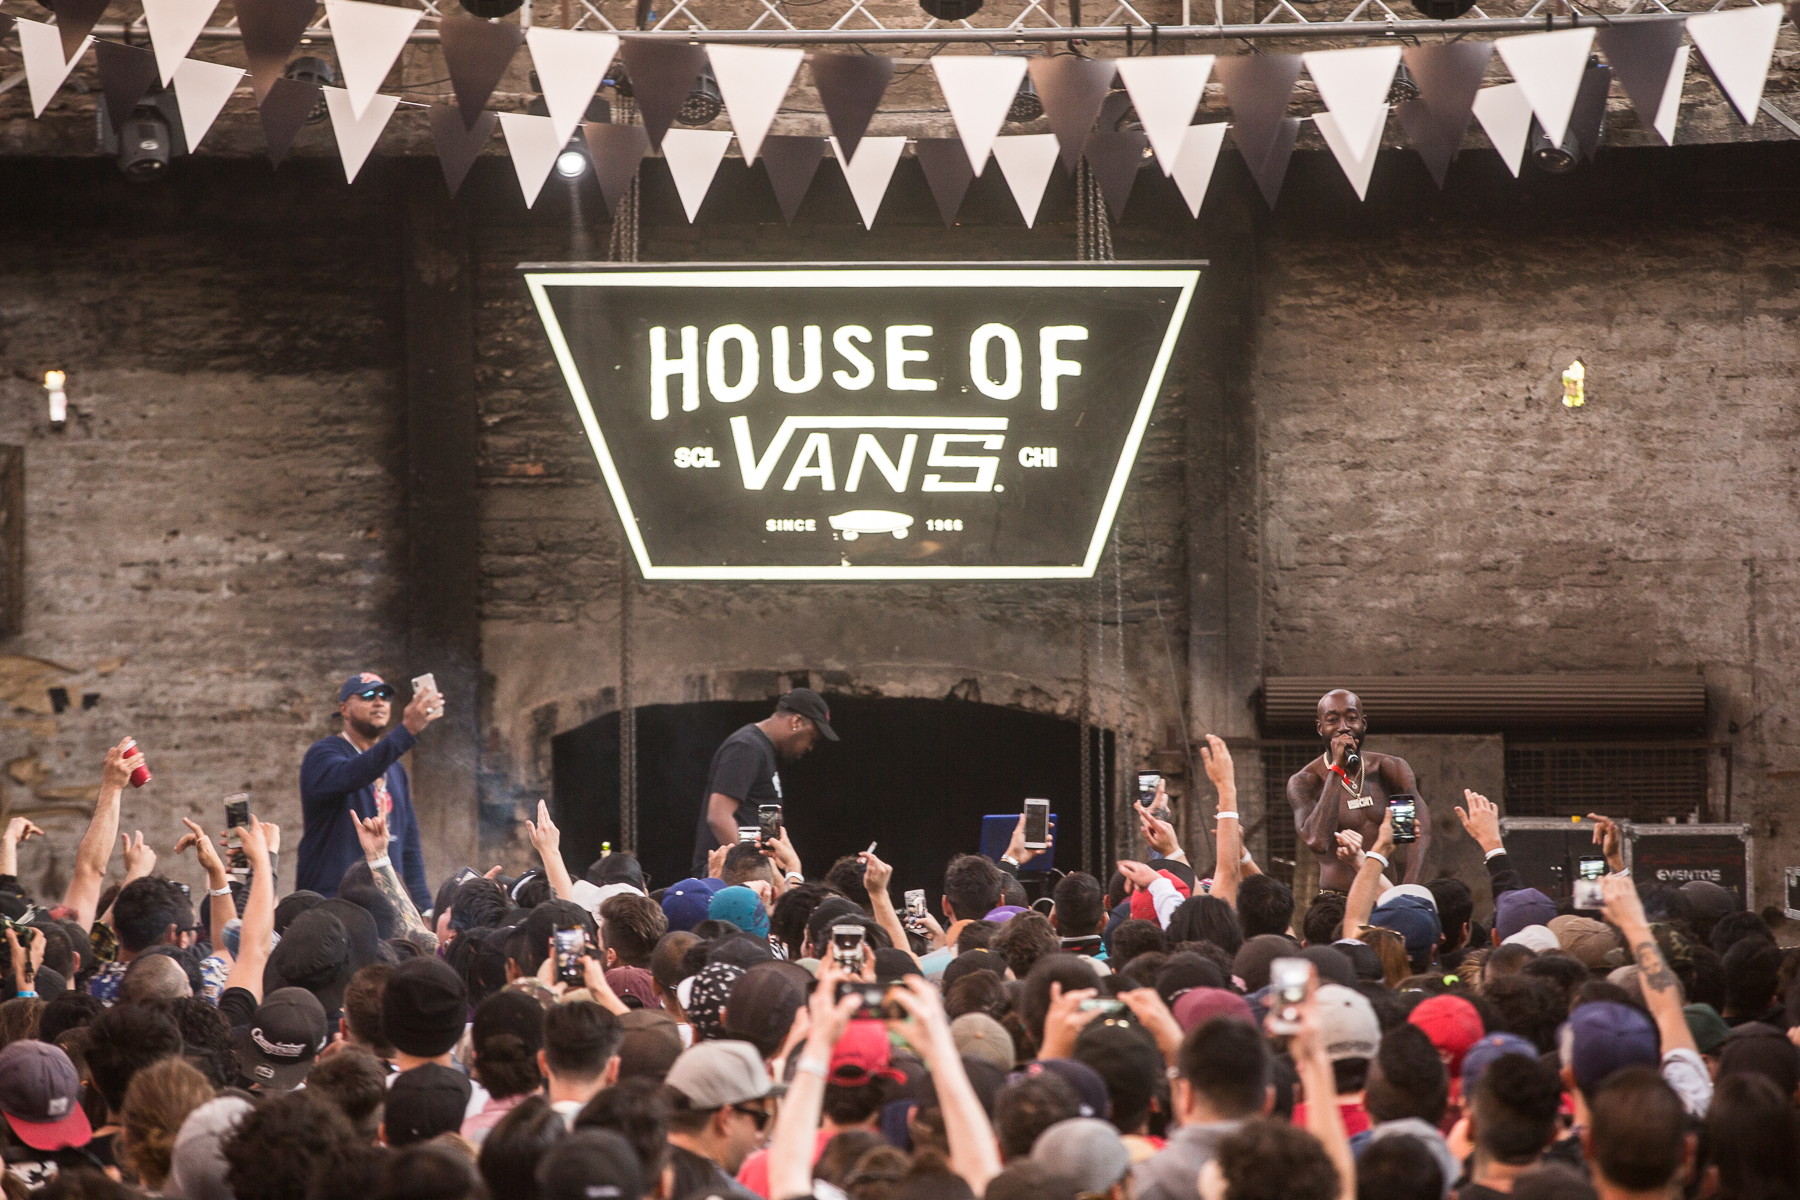 house of vans 2018 chile